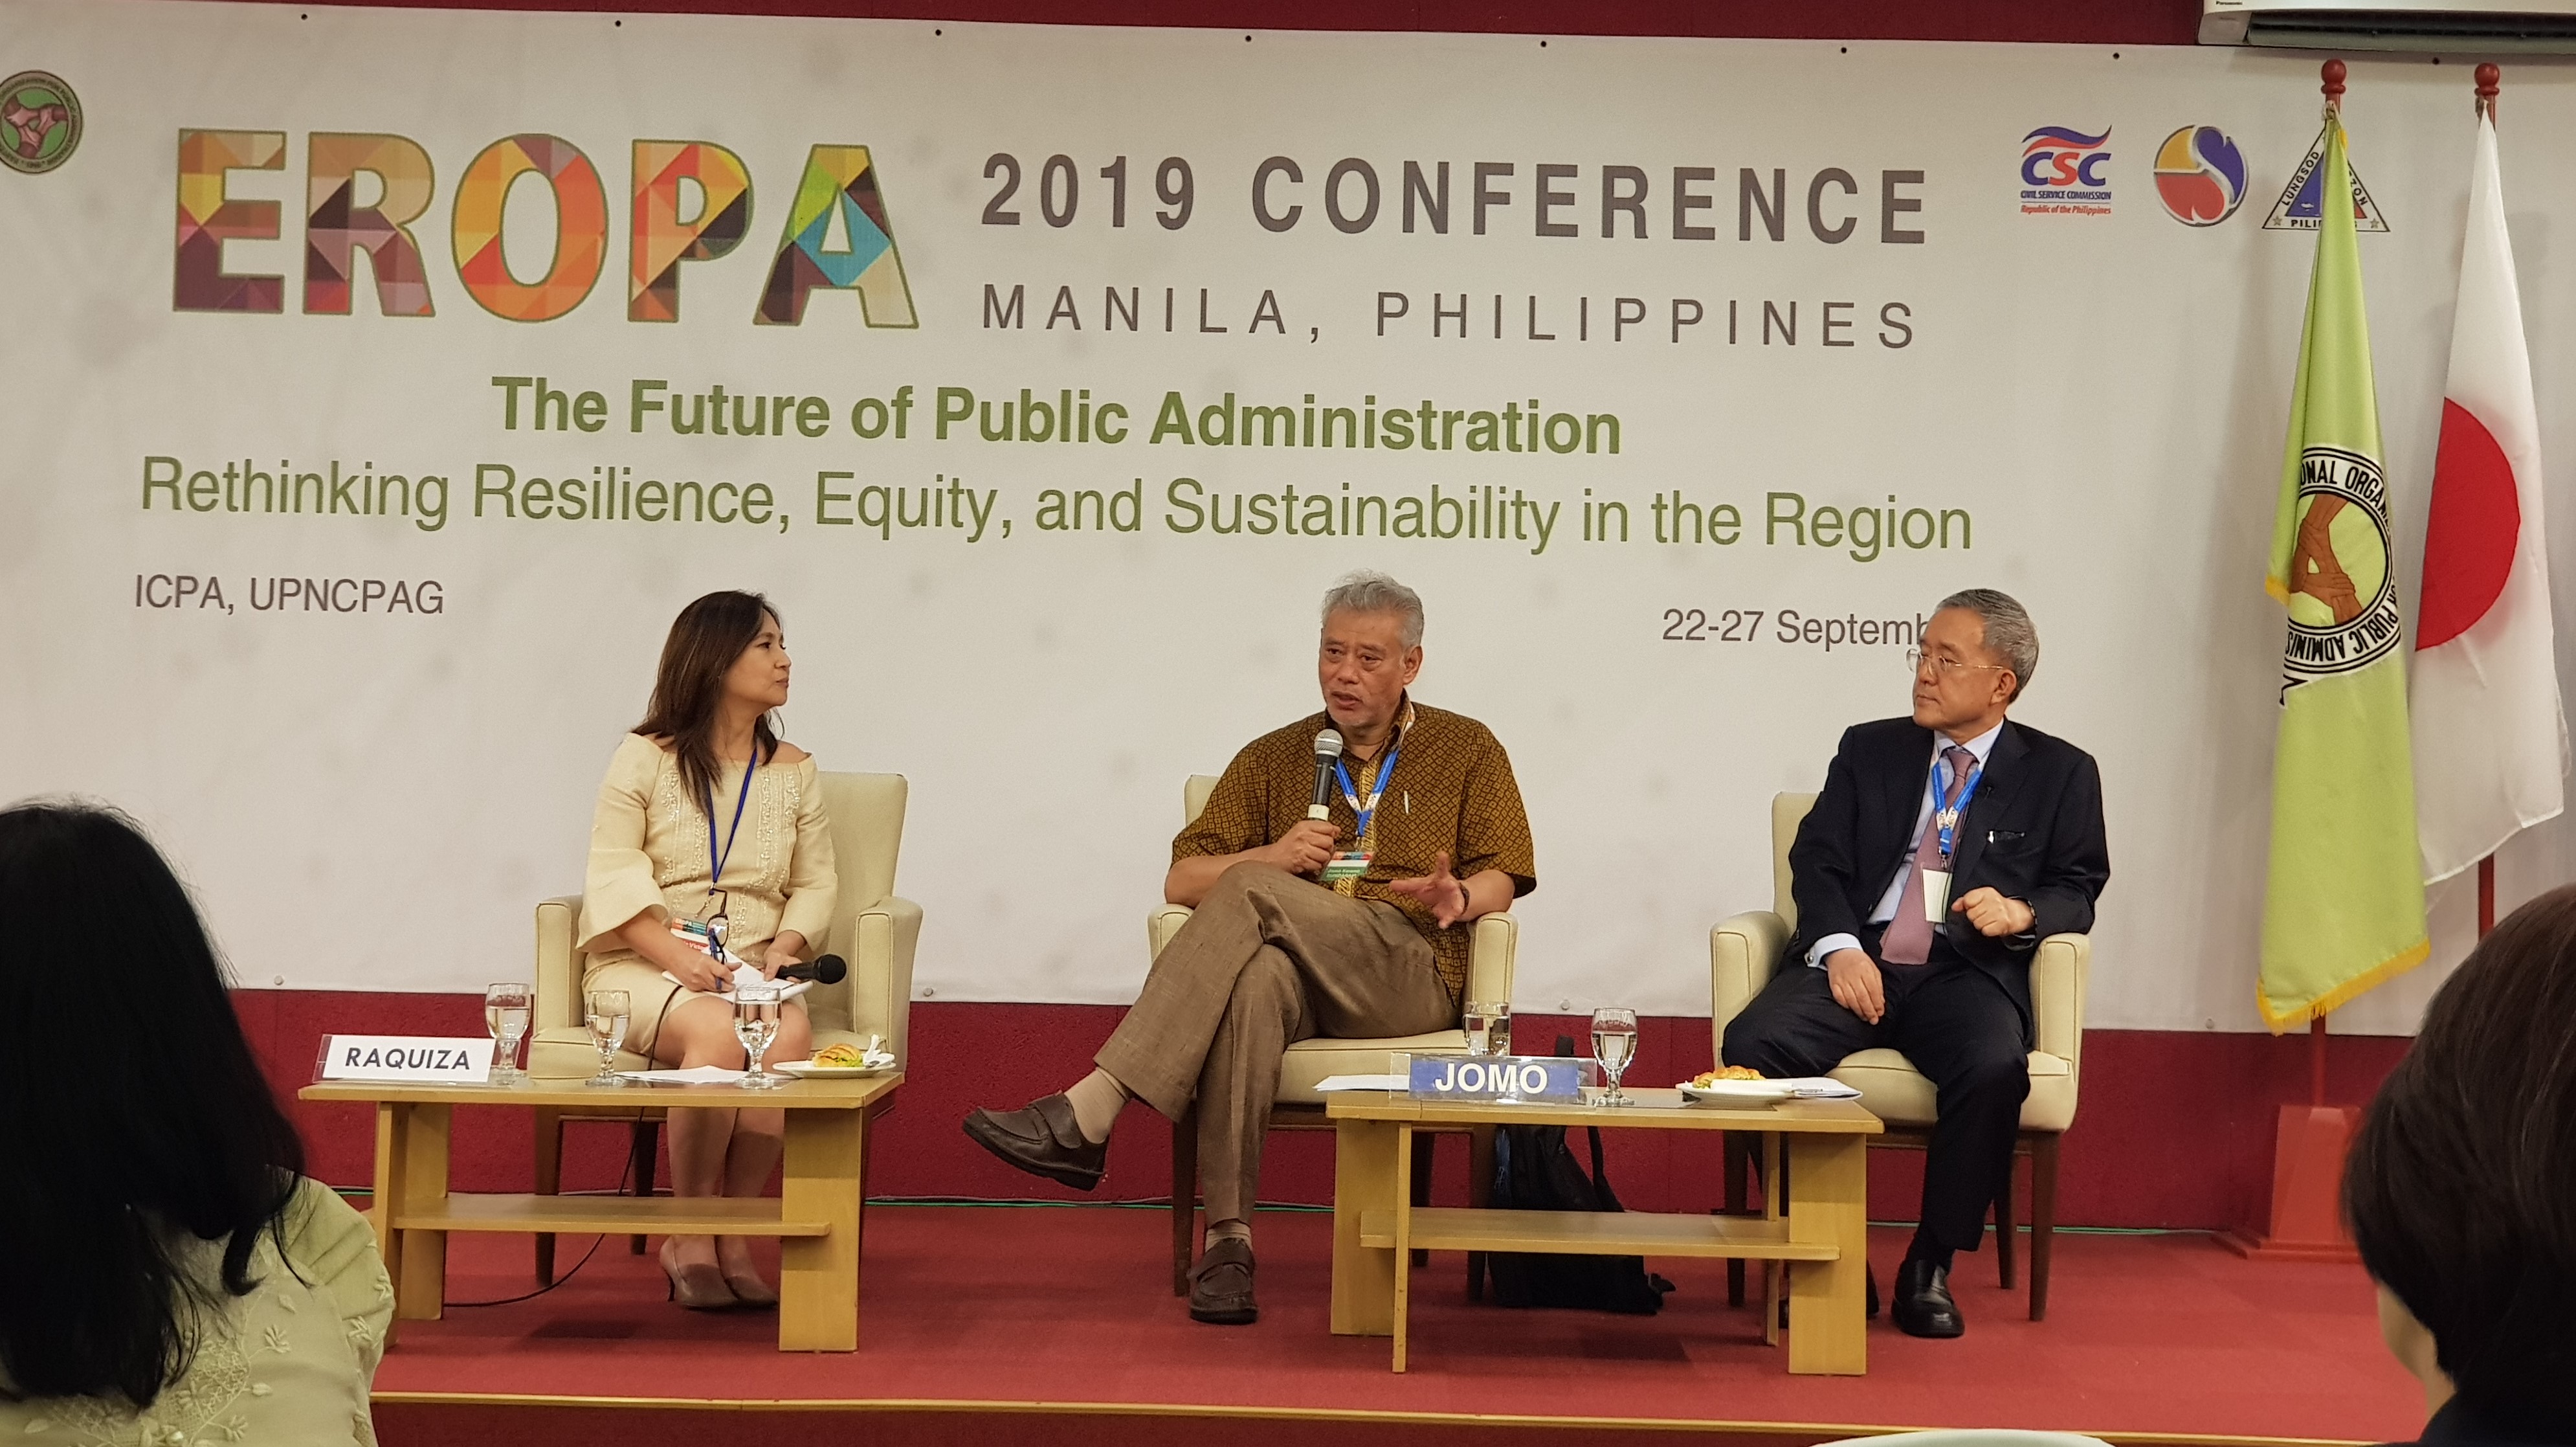 LOGODI attends the  27th EROPA General Assembly and Conference 큰 이미지[마우스 클릭 시 창닫기]